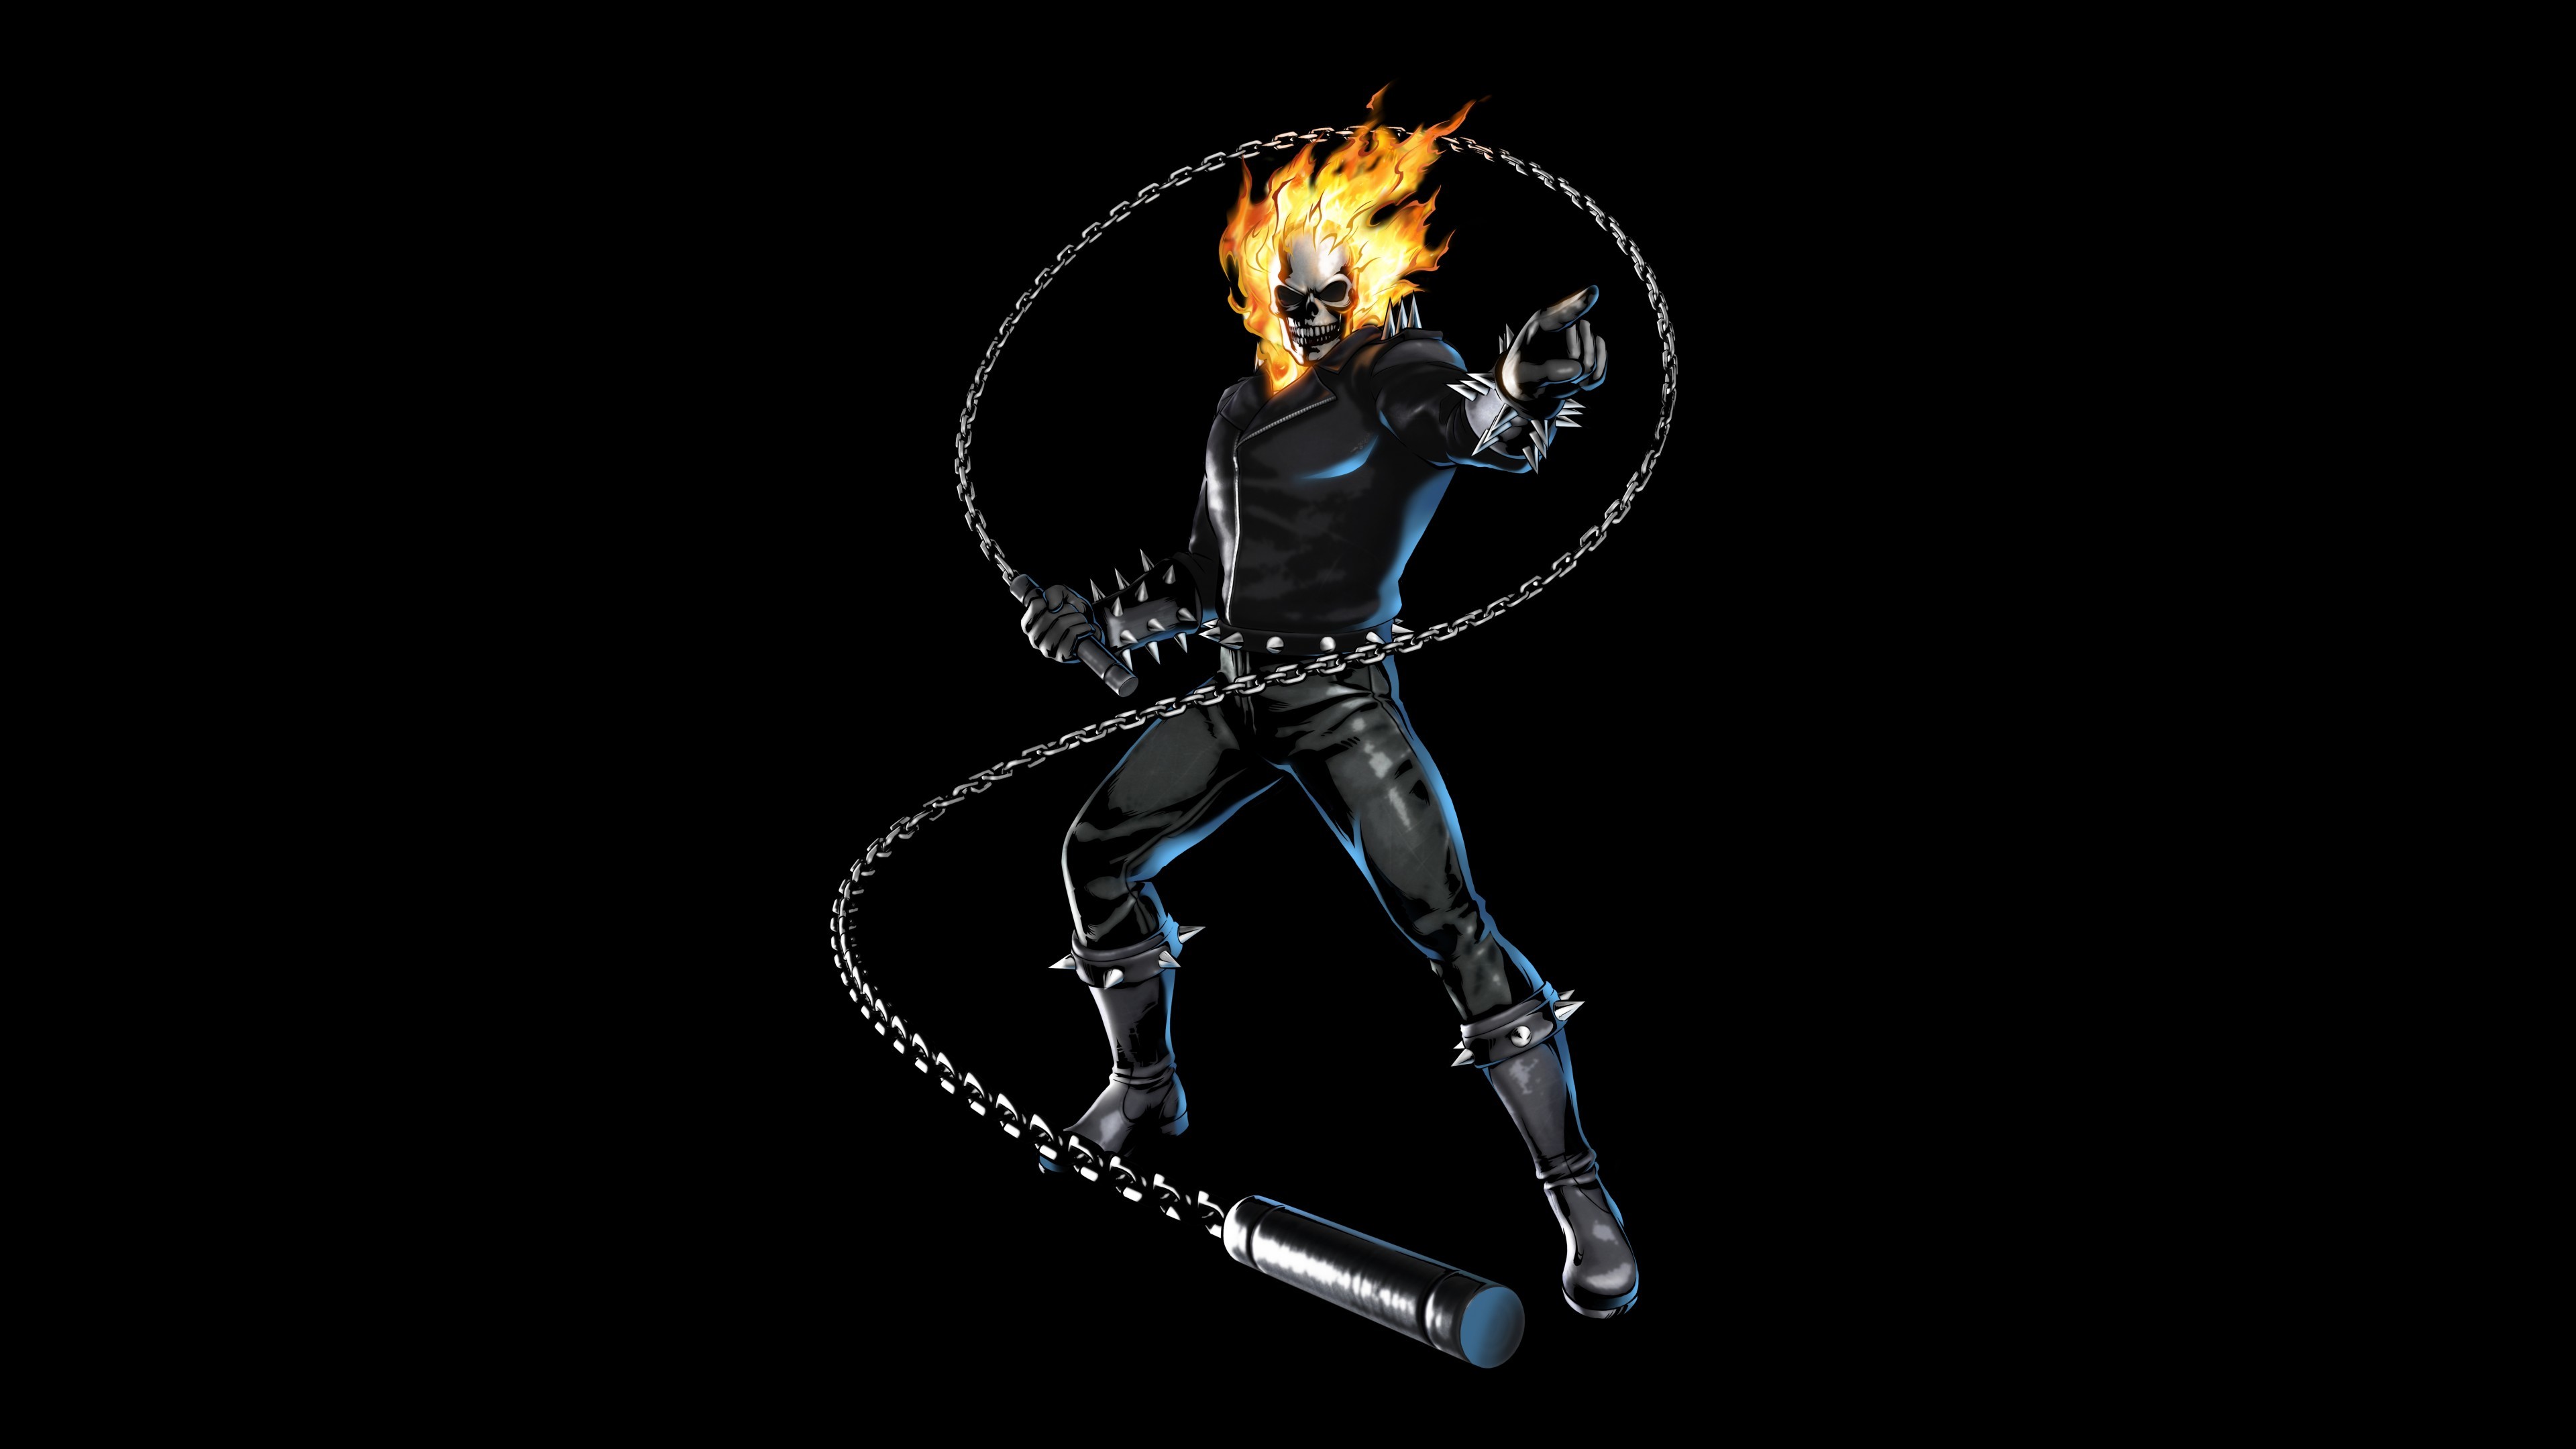 3840x2160 Tags: Ghost Rider ...